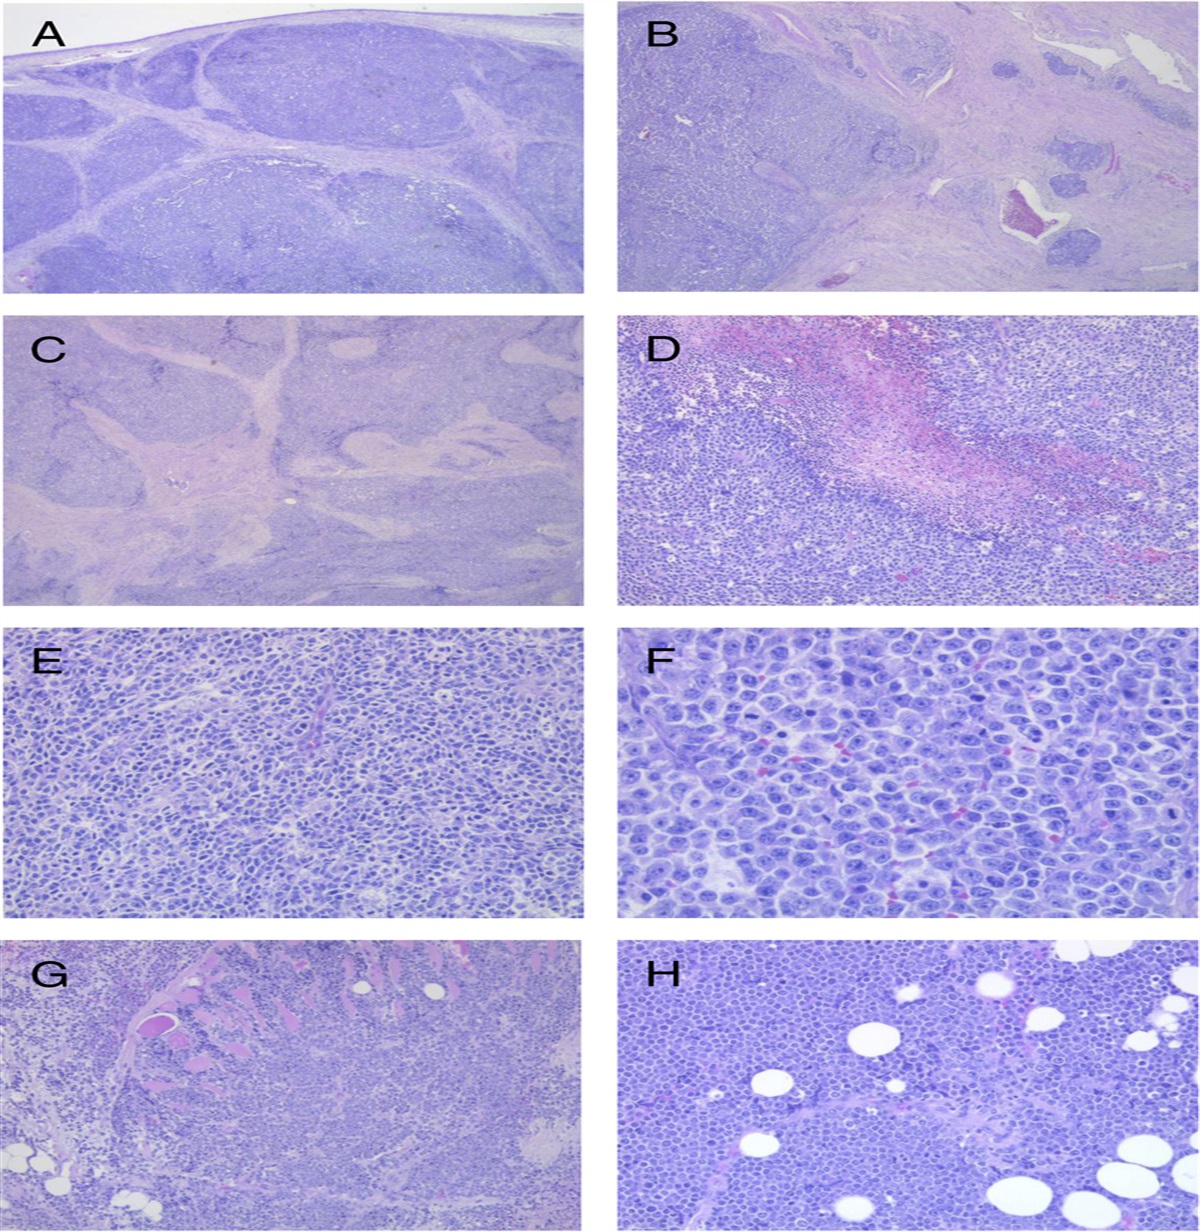 Undifferentiated Endometrial Carcinoma—Diagnostic and Therapeutic Challenges